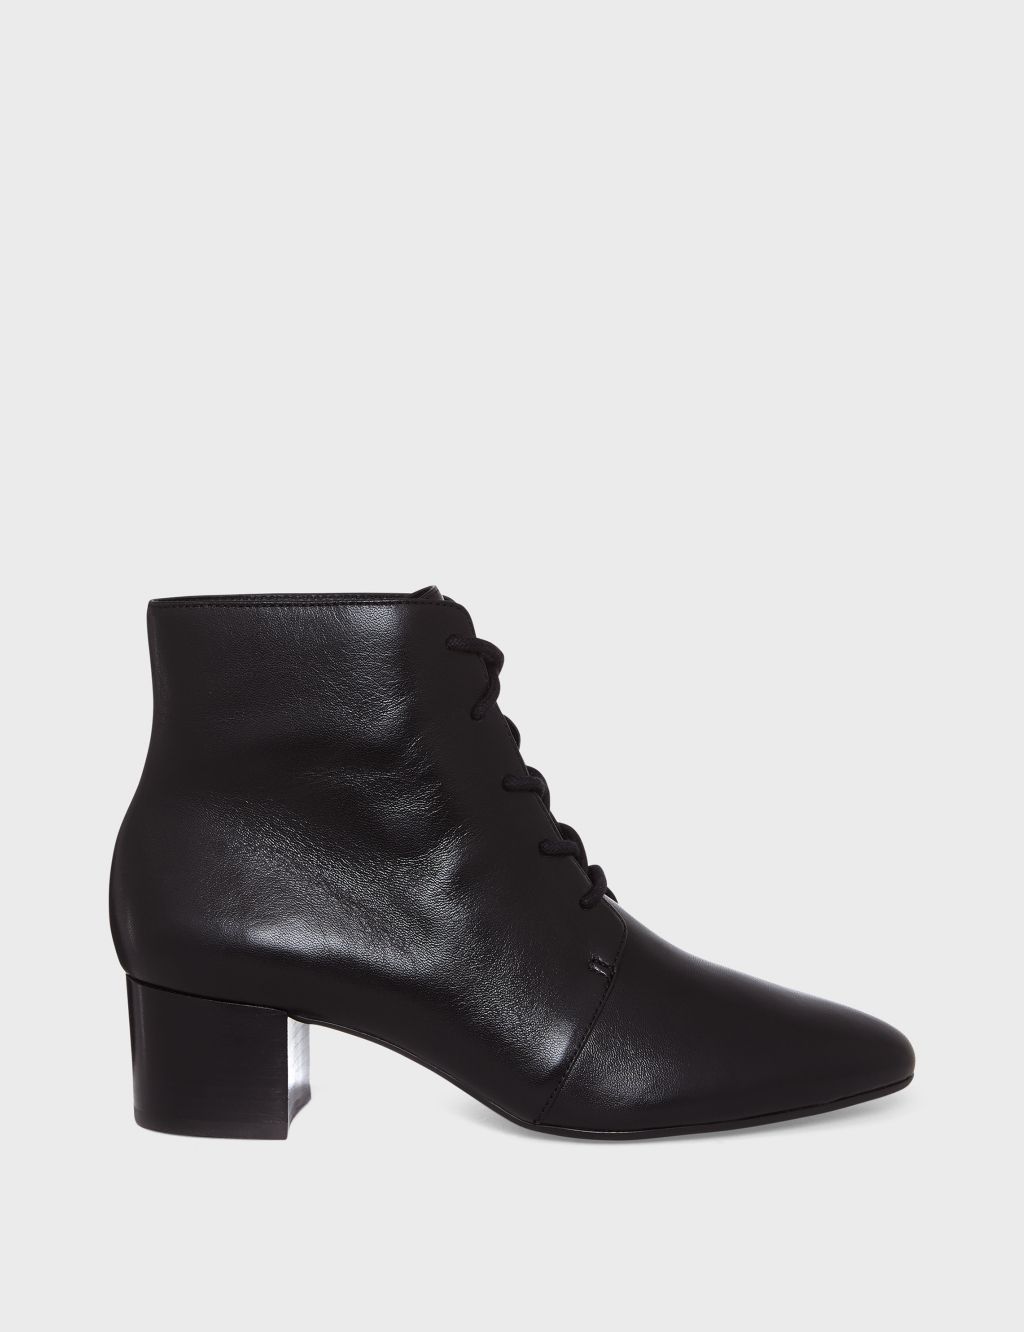 Leather Lace Up Block Heel Ankle Boots image 2